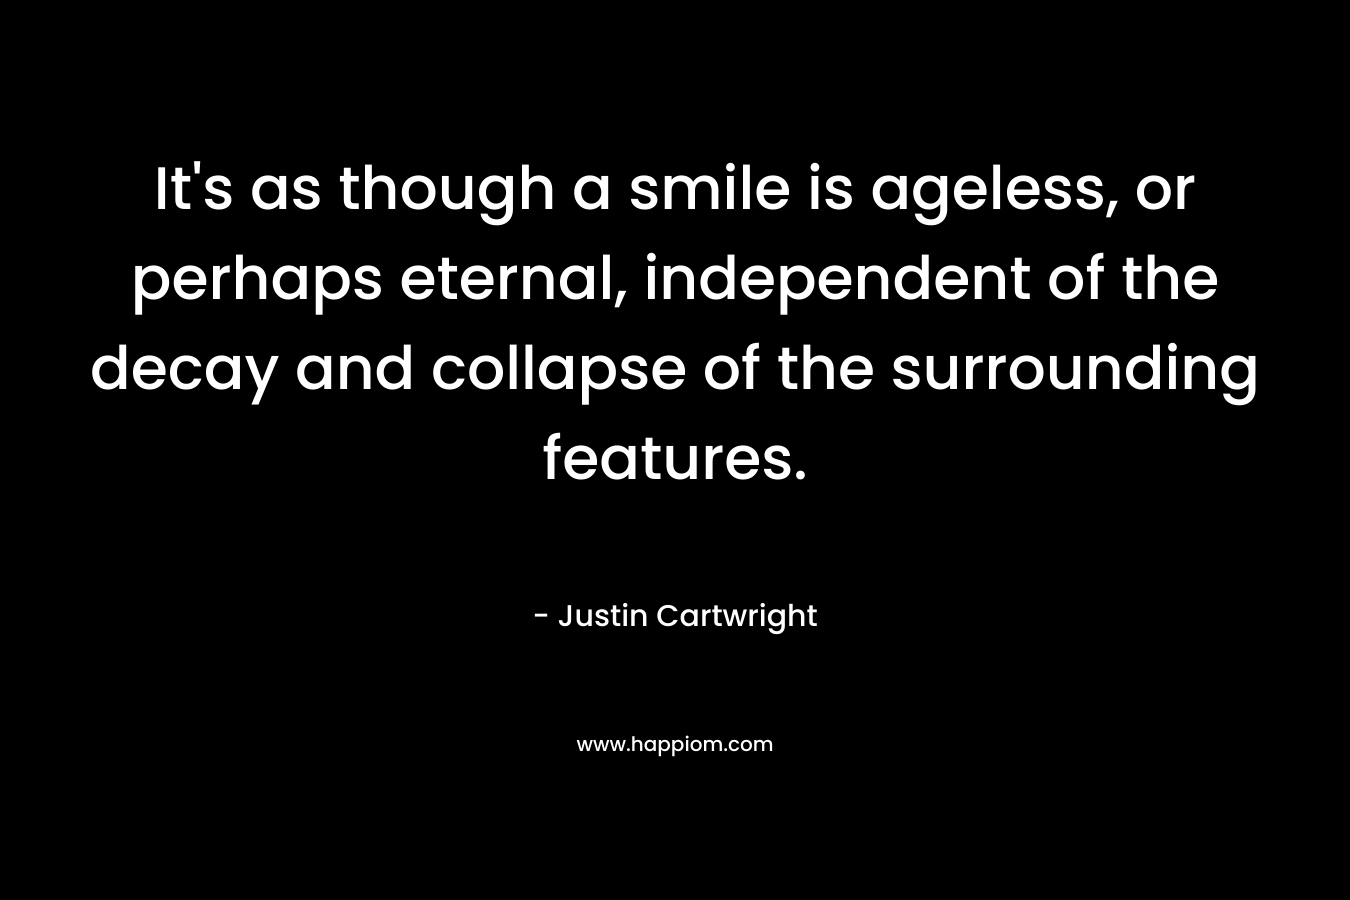 It’s as though a smile is ageless, or perhaps eternal, independent of the decay and collapse of the surrounding features. – Justin Cartwright